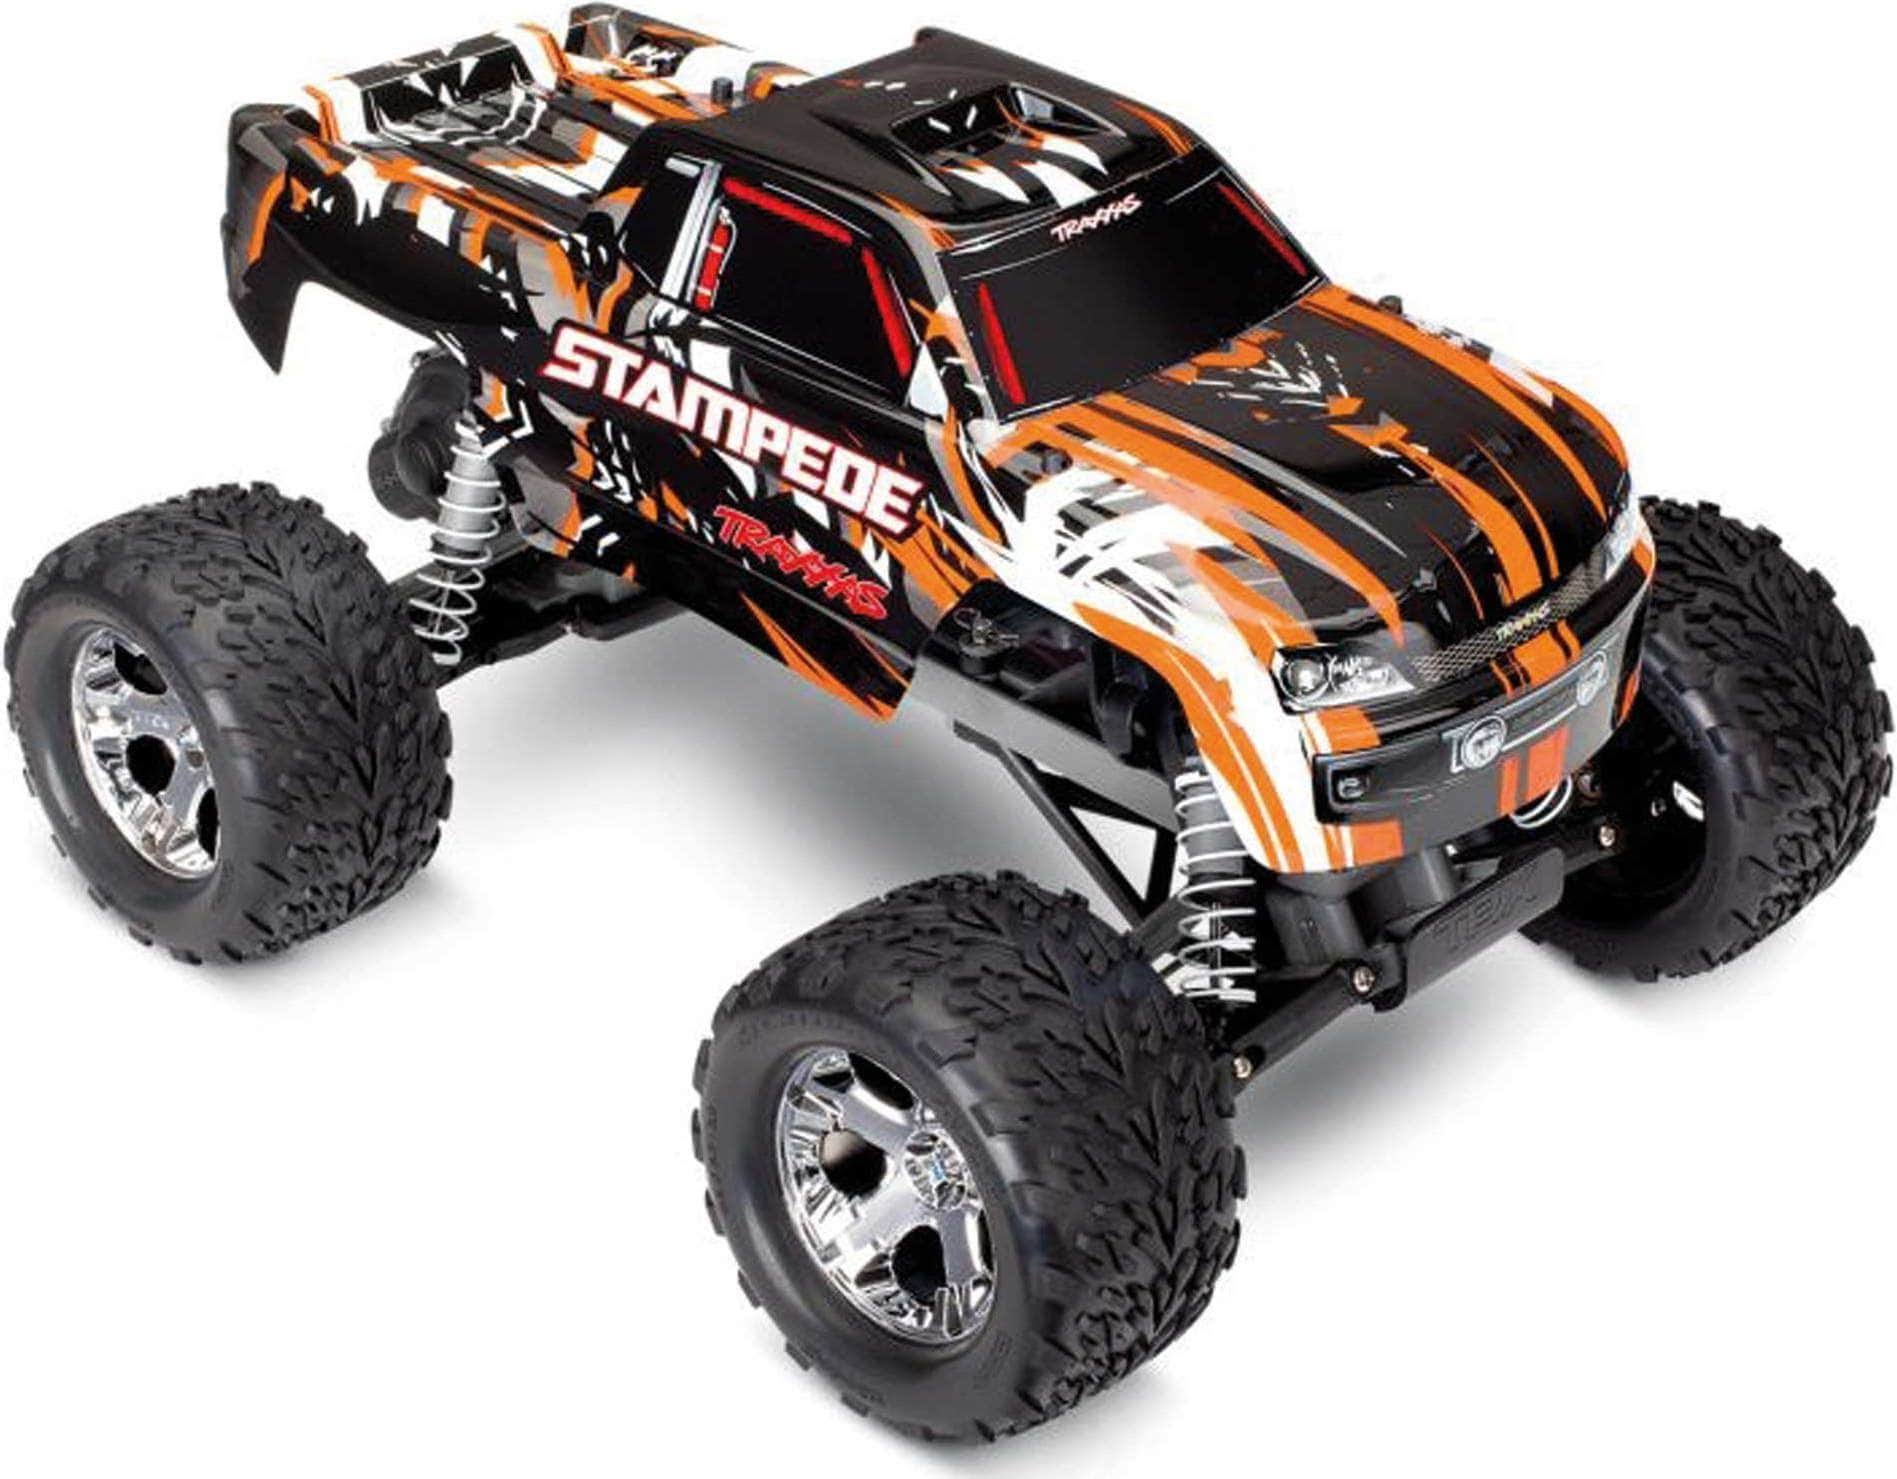 Traxxas Stampede 1/10 2wd XL-5 Includes Battery & Charger Orange